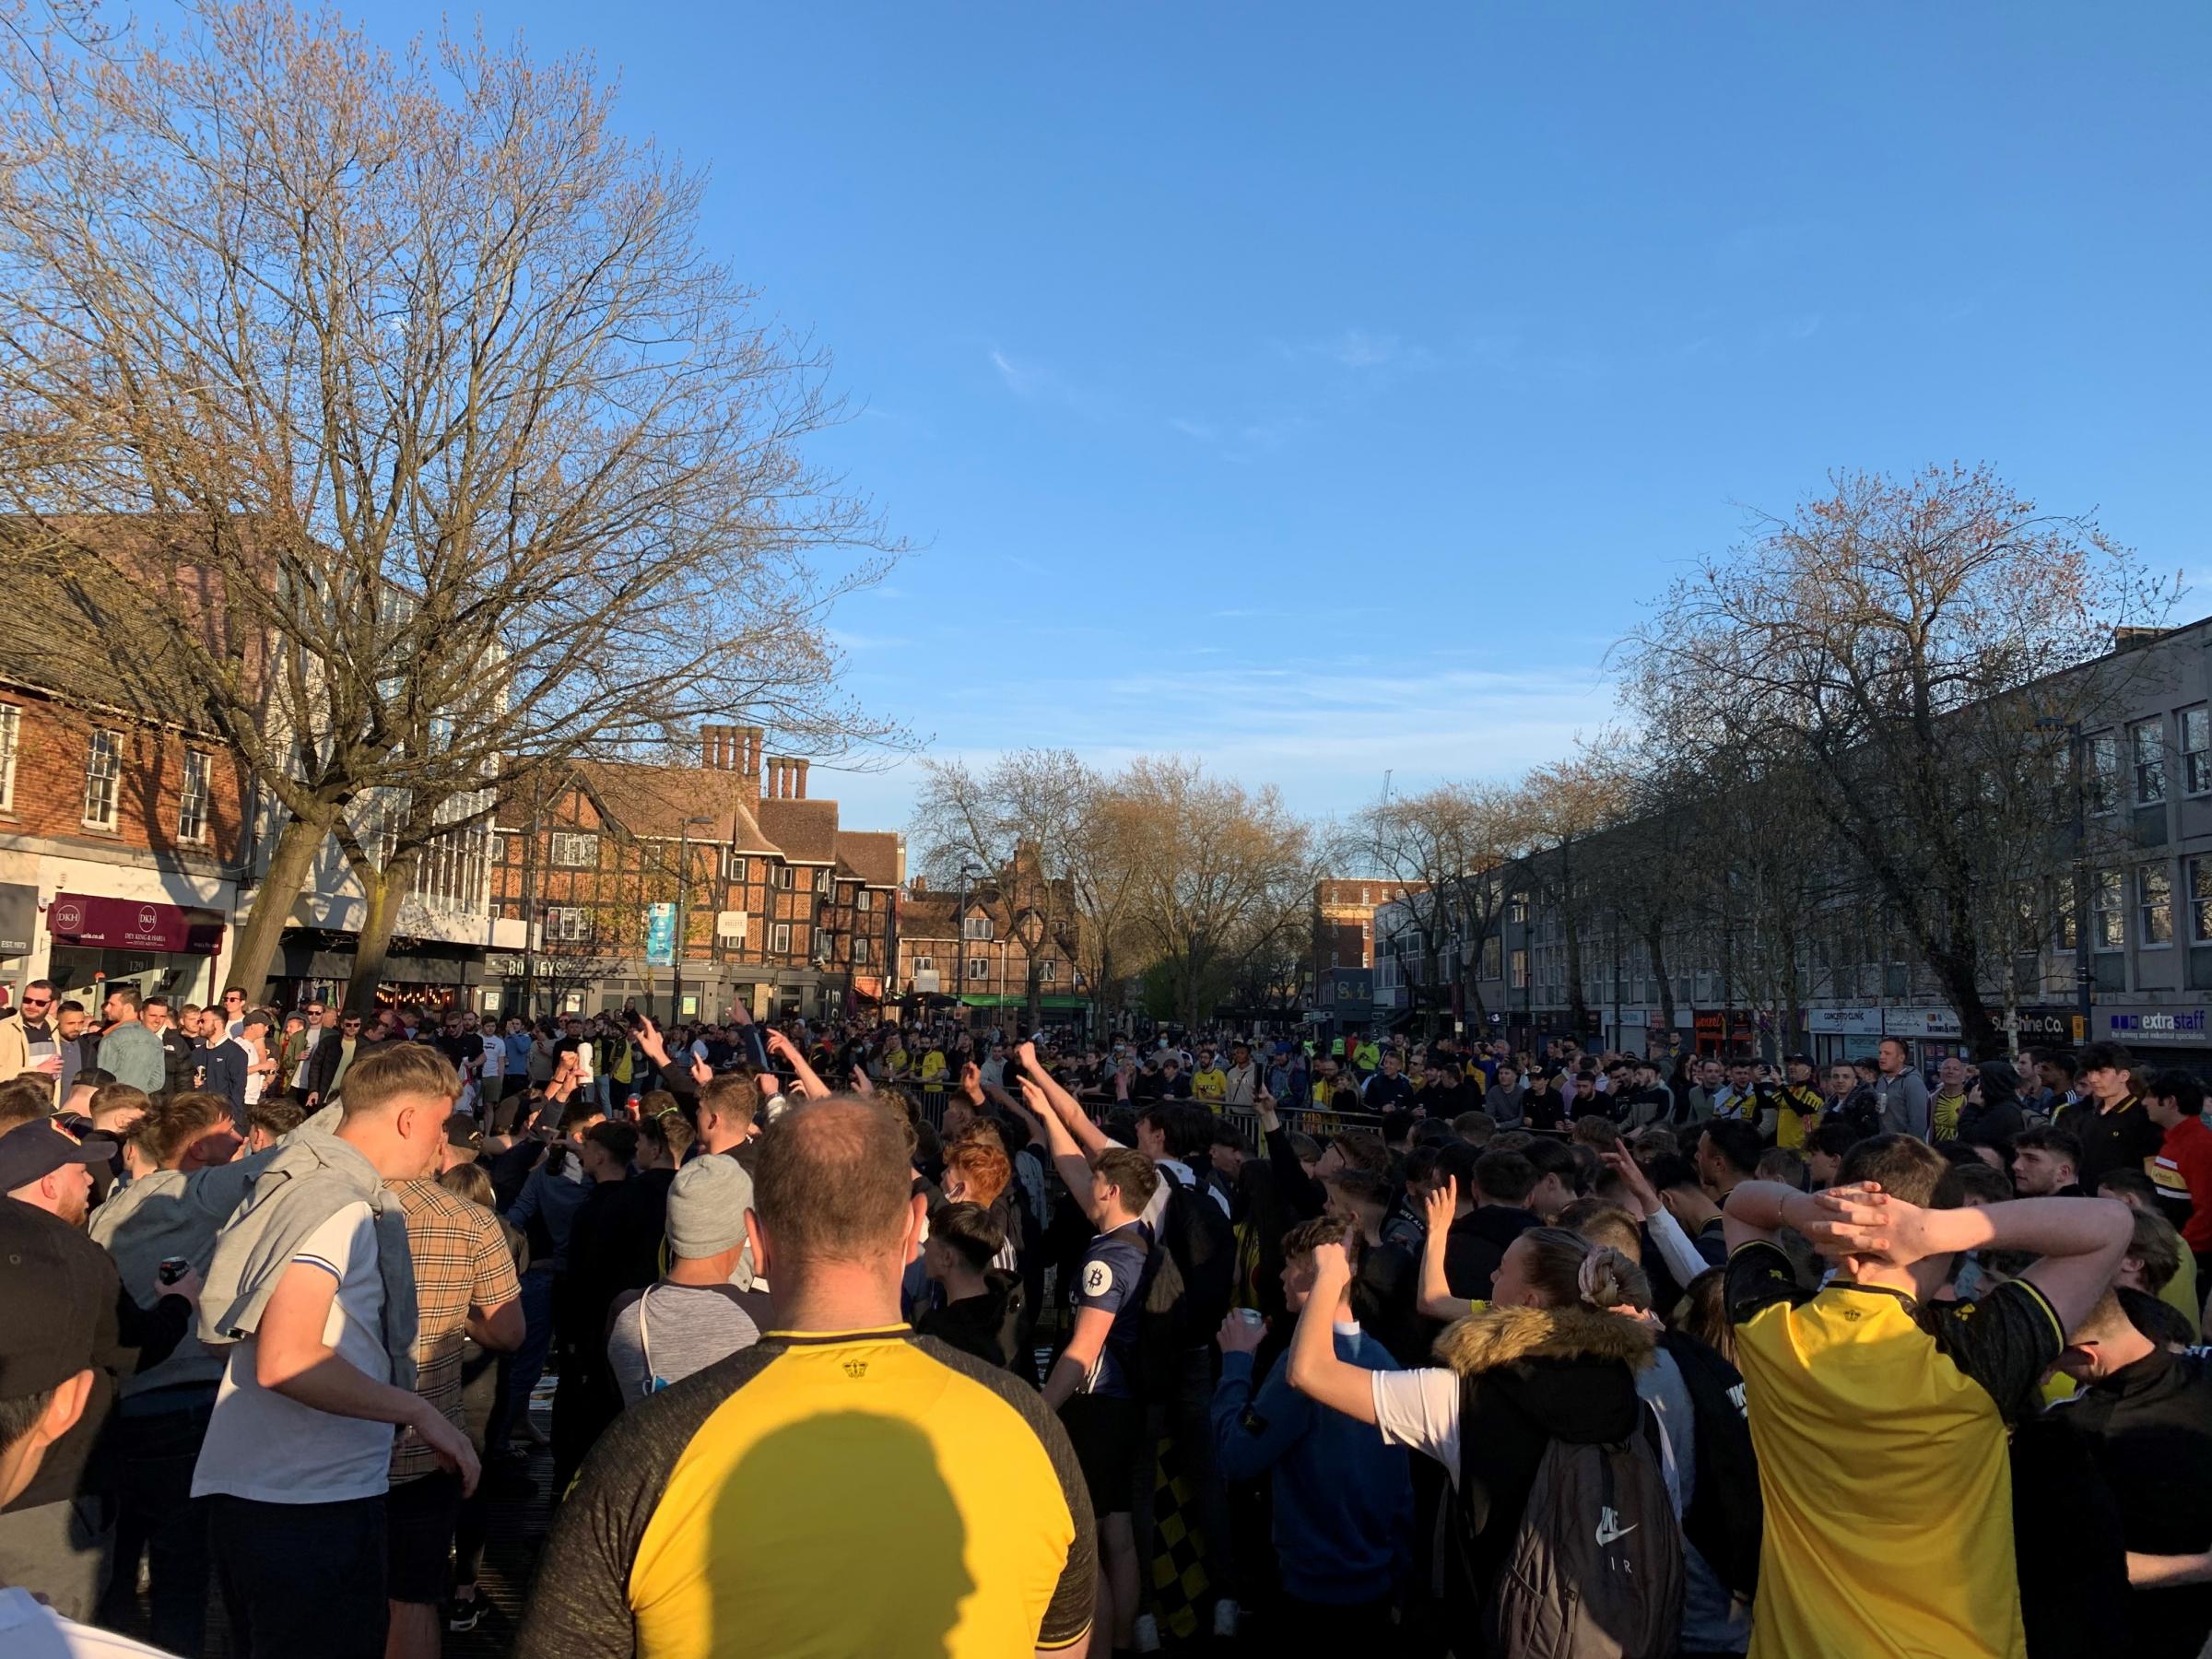 Scenes in The Parade in Watford town centre last weekend after Watford secured promotion back to the Premier League